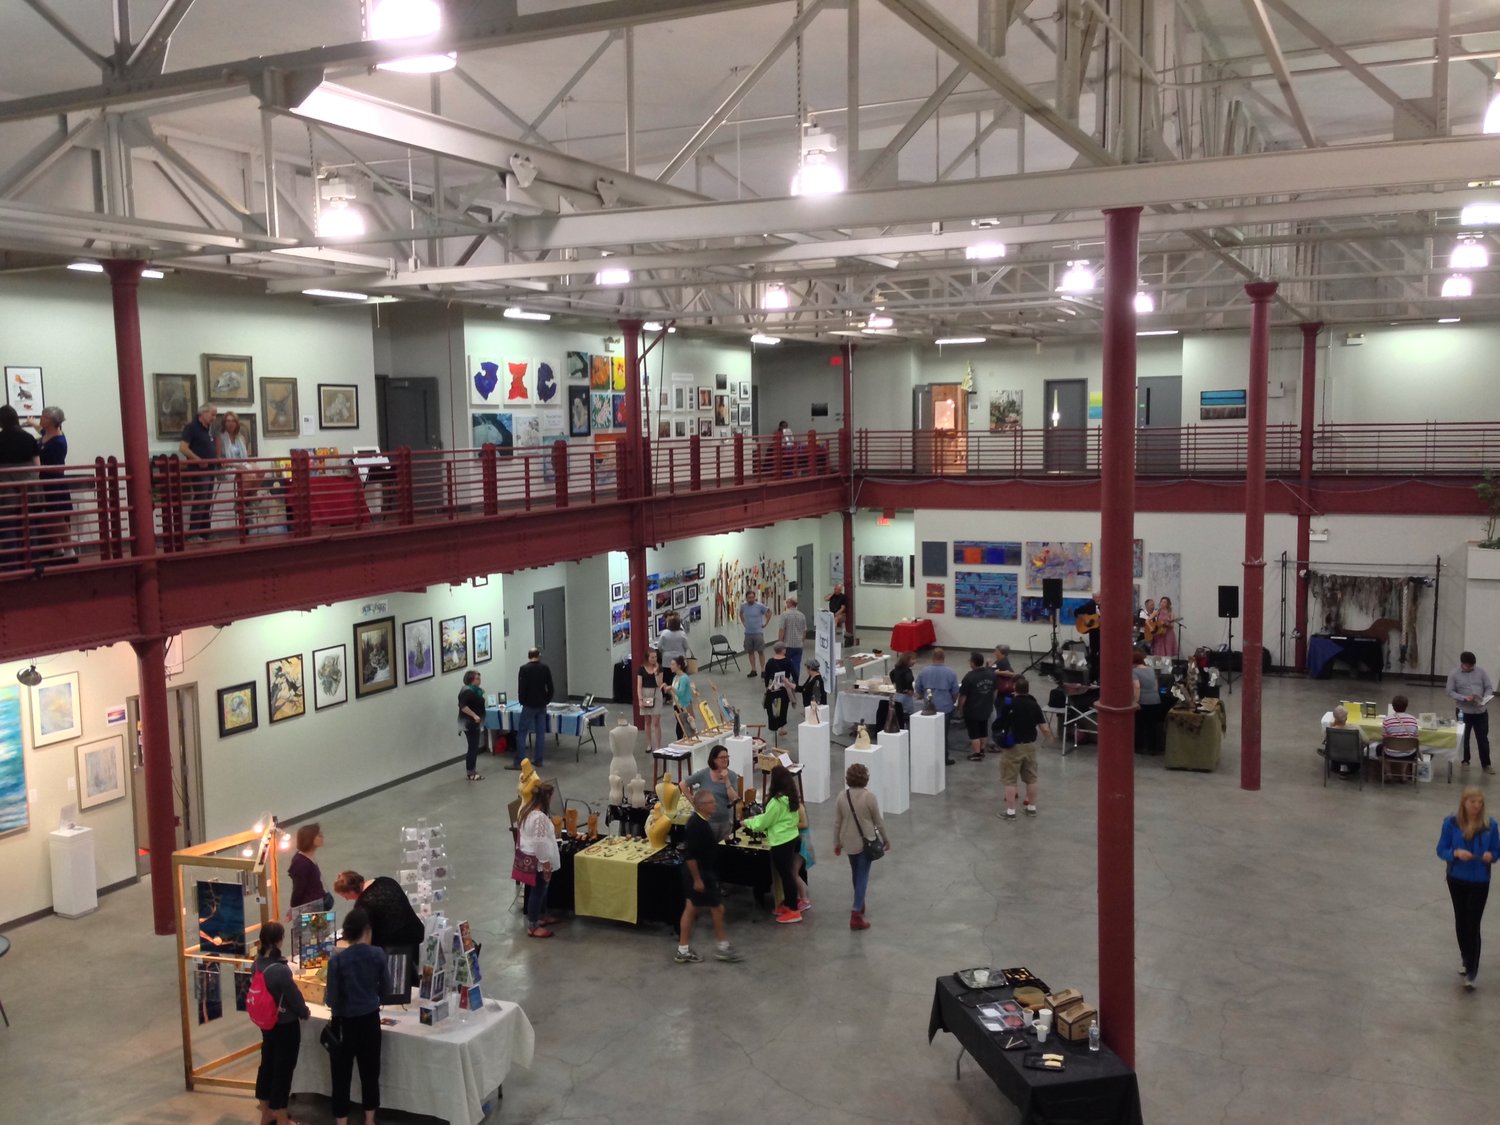 Crowds flock the two-story Grain Belt Warehouse during Art-A-Whirl 2016. (Photo by Susan Schaefer)